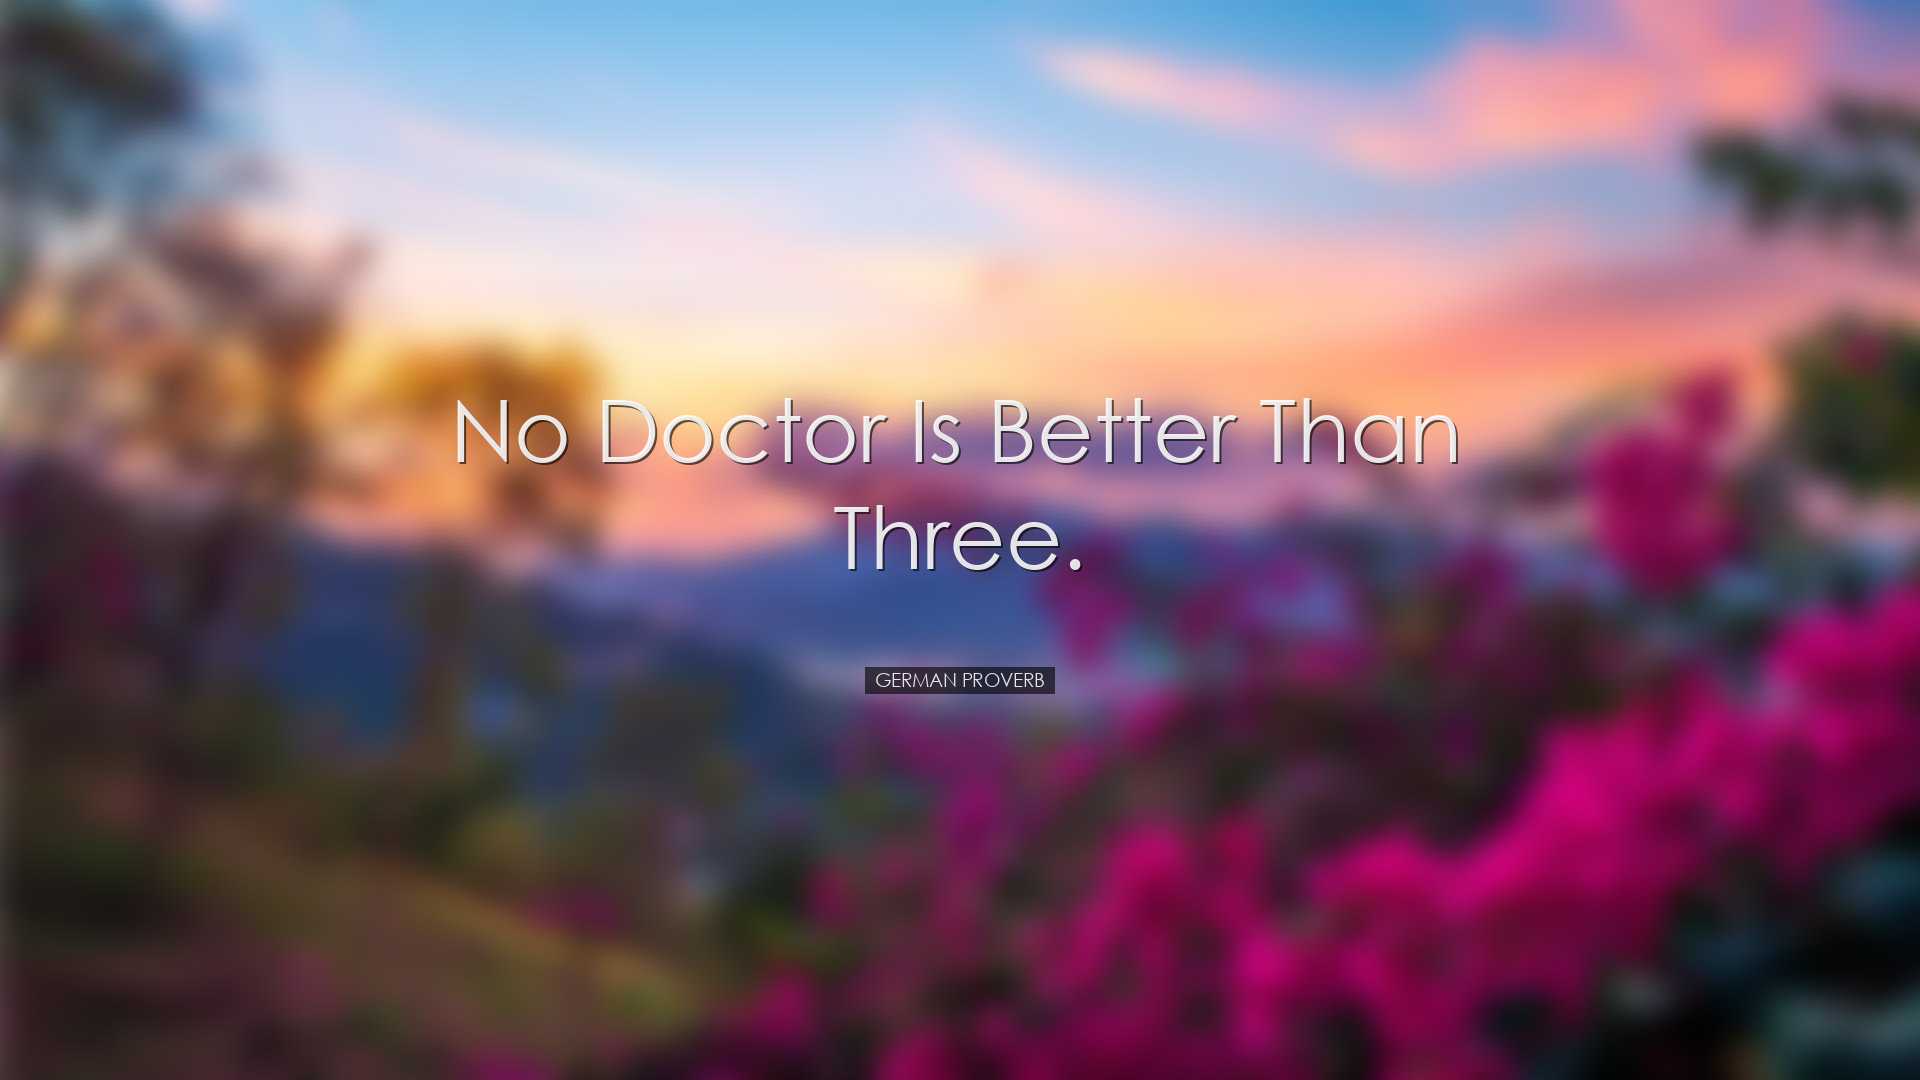 No doctor is better than three. - German Proverb